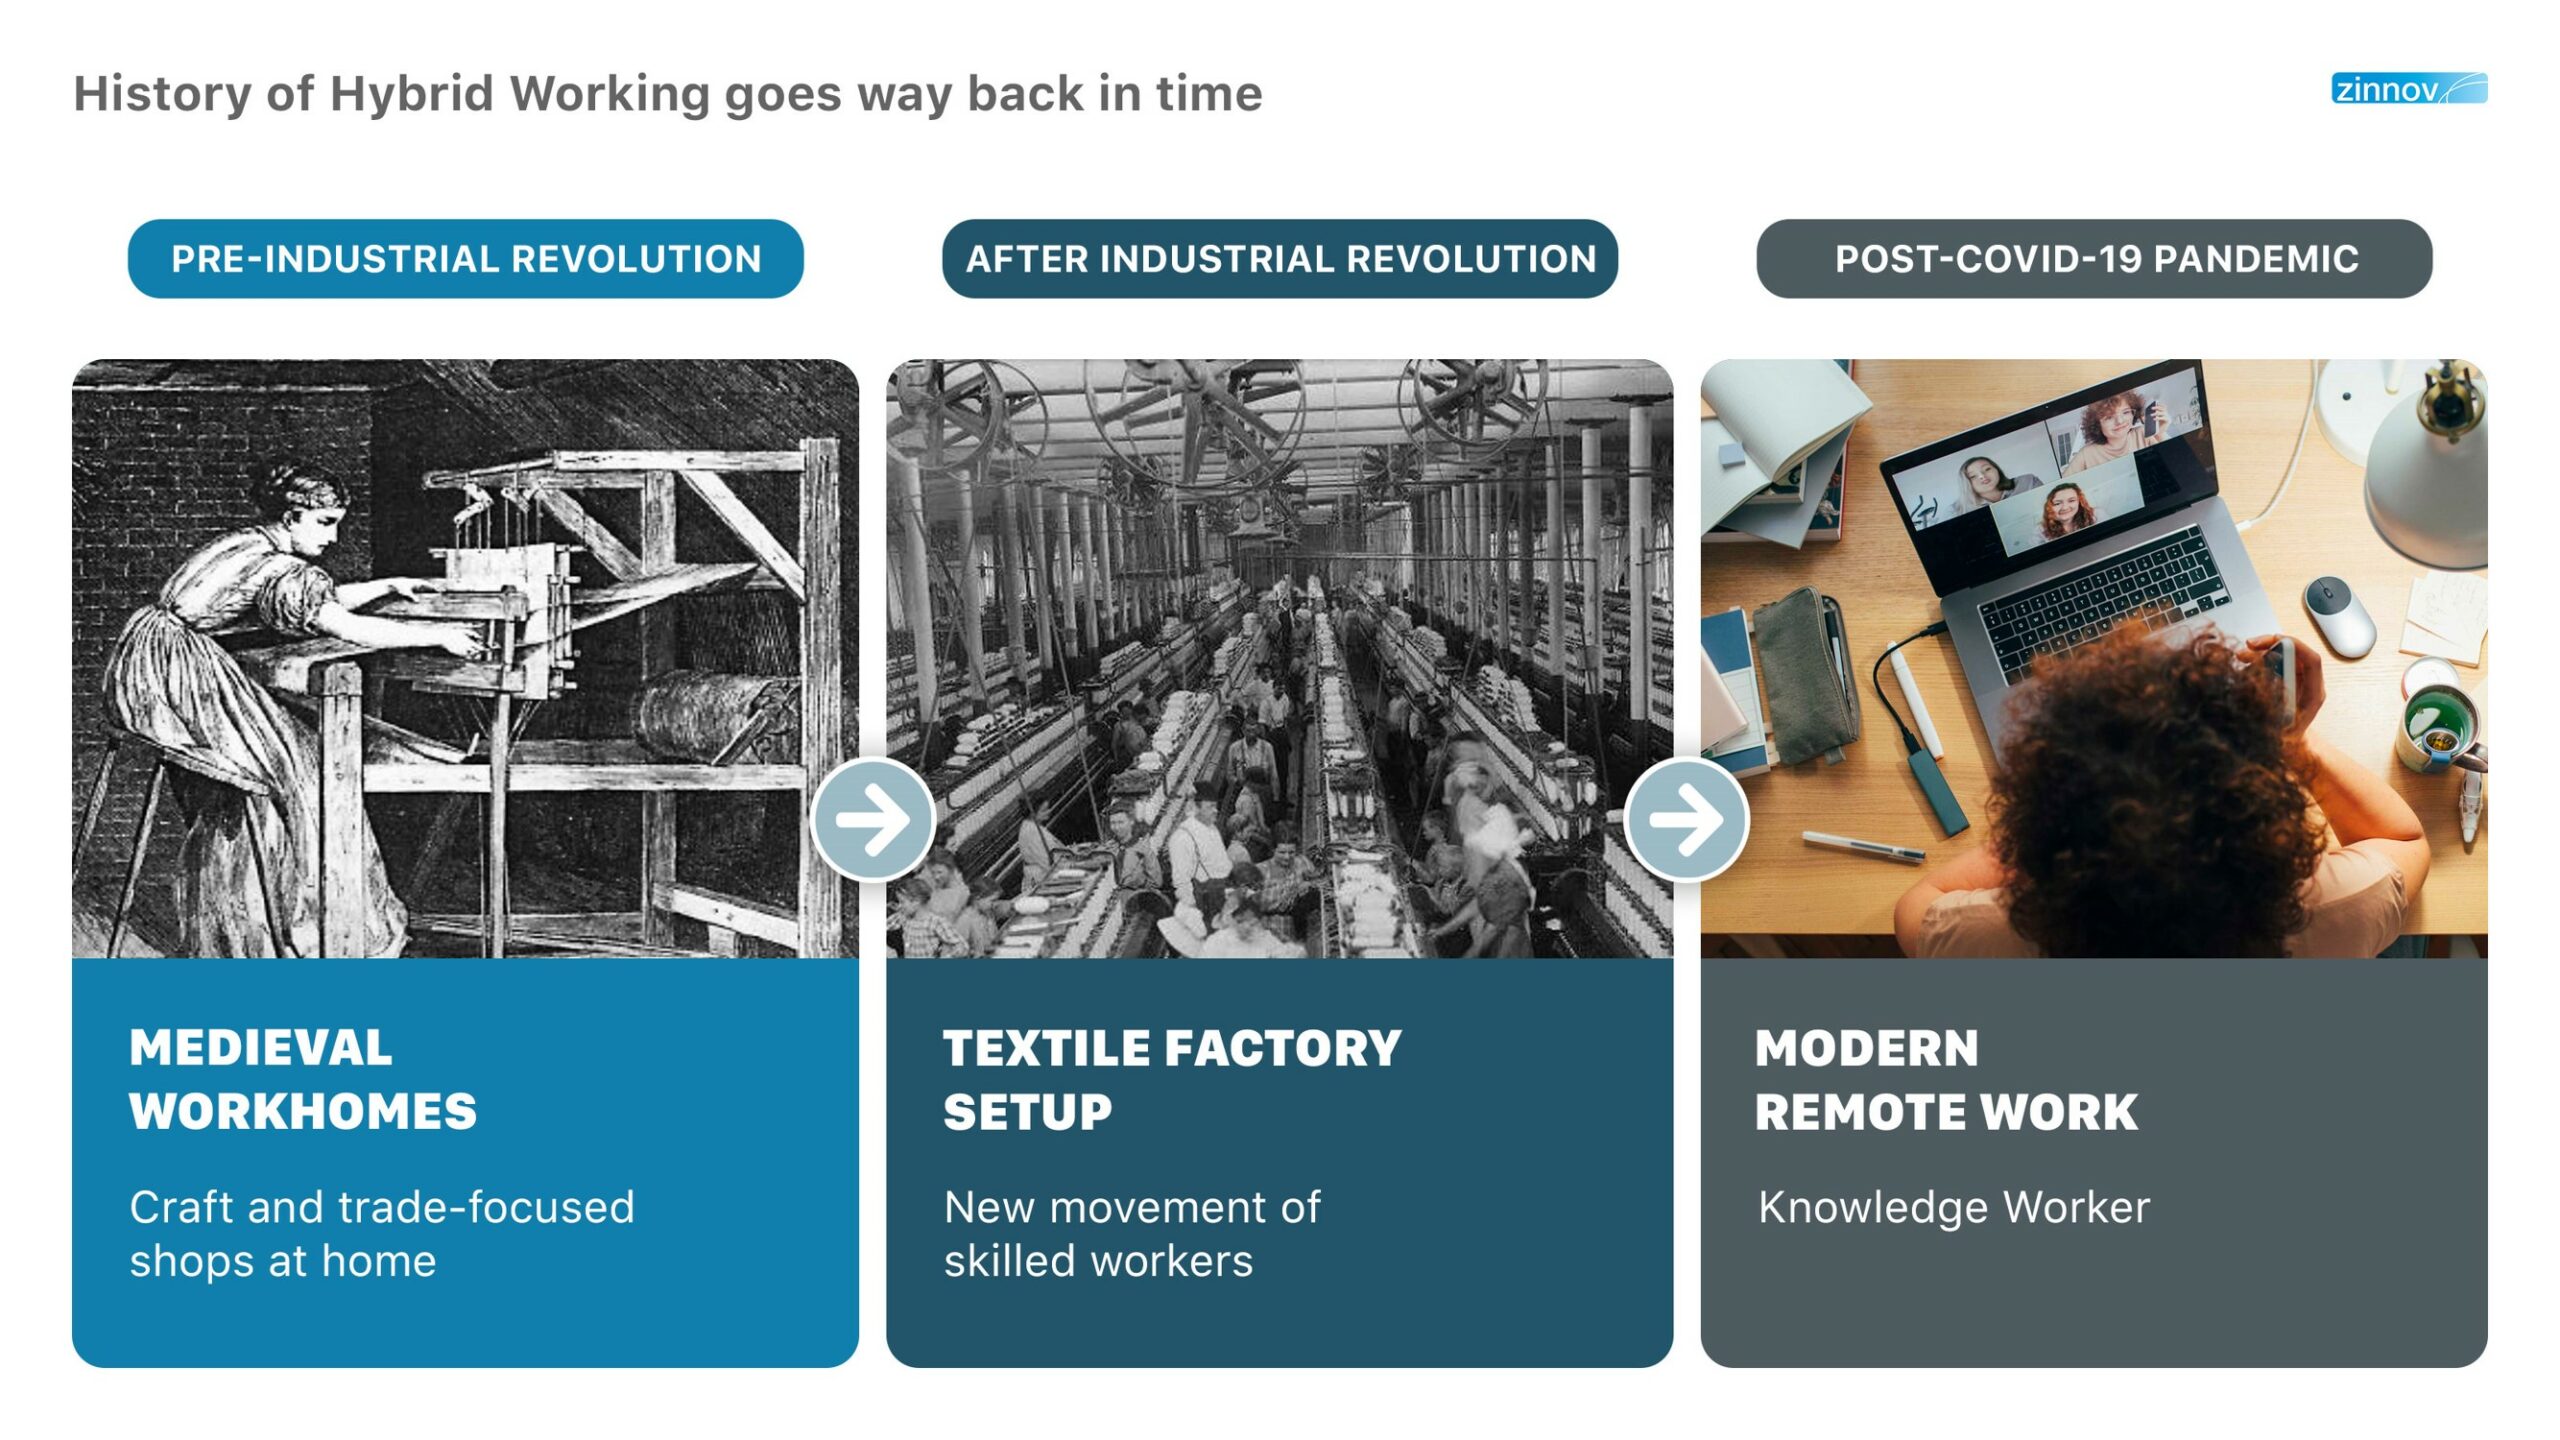 History of hybrid working goes way back in time